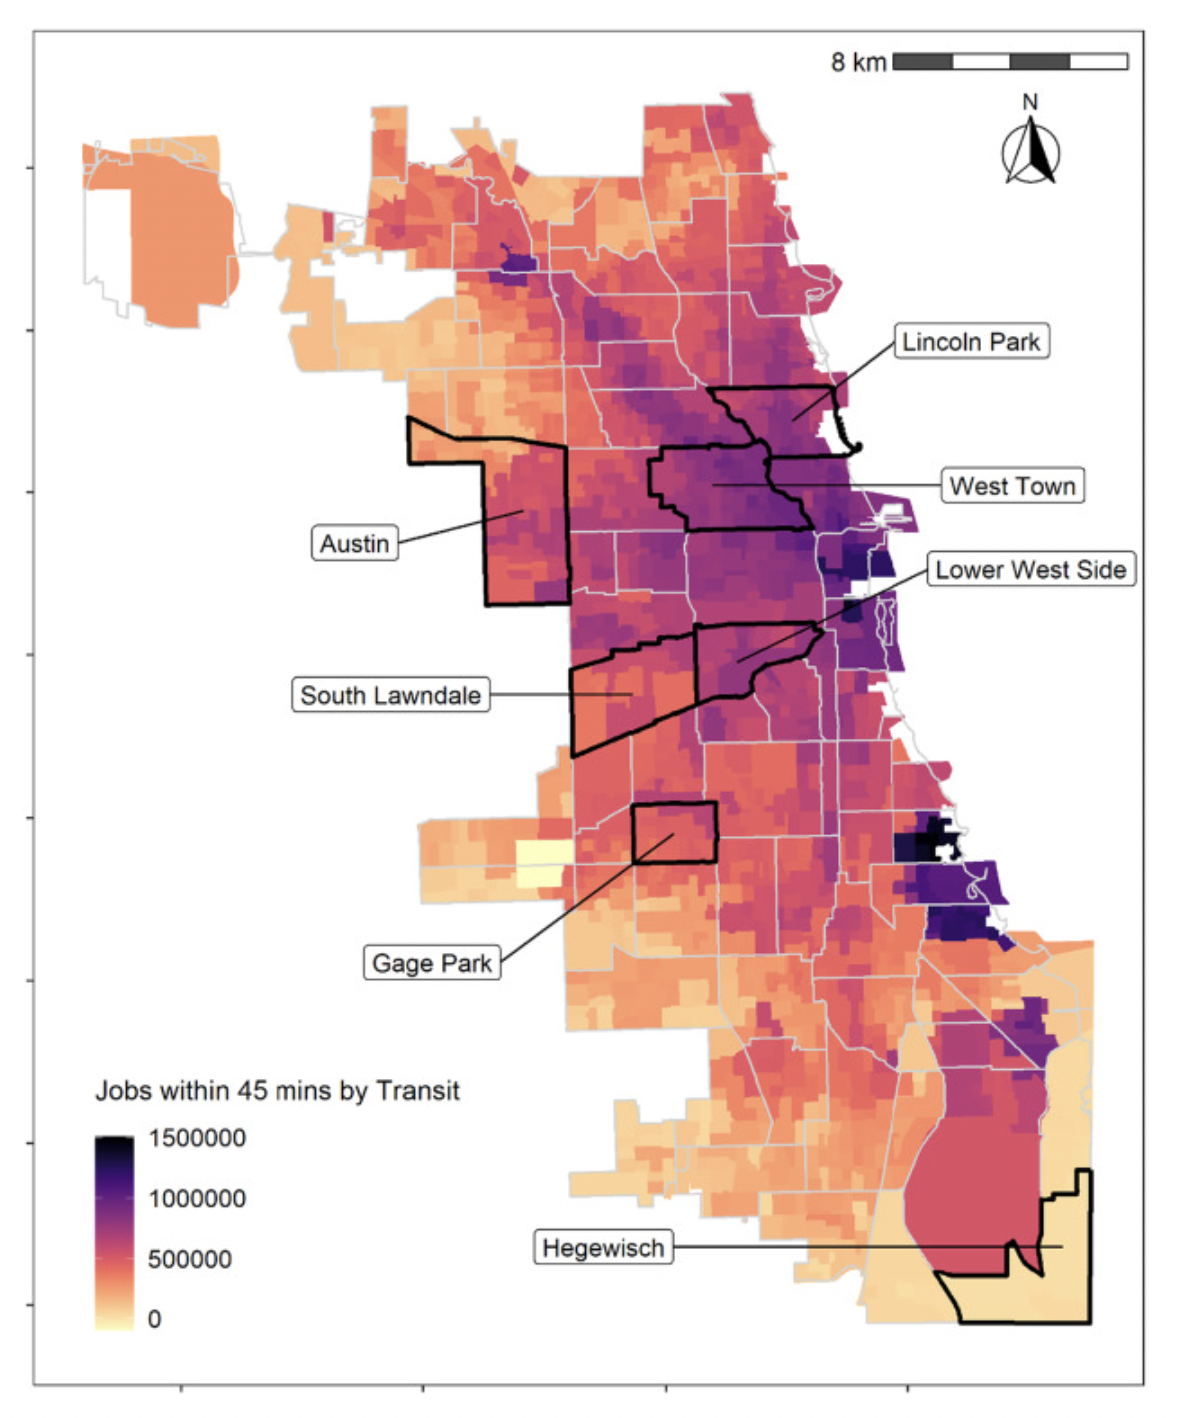 Job access via transit in various Chicago neighborhoods. Image: Equiticity